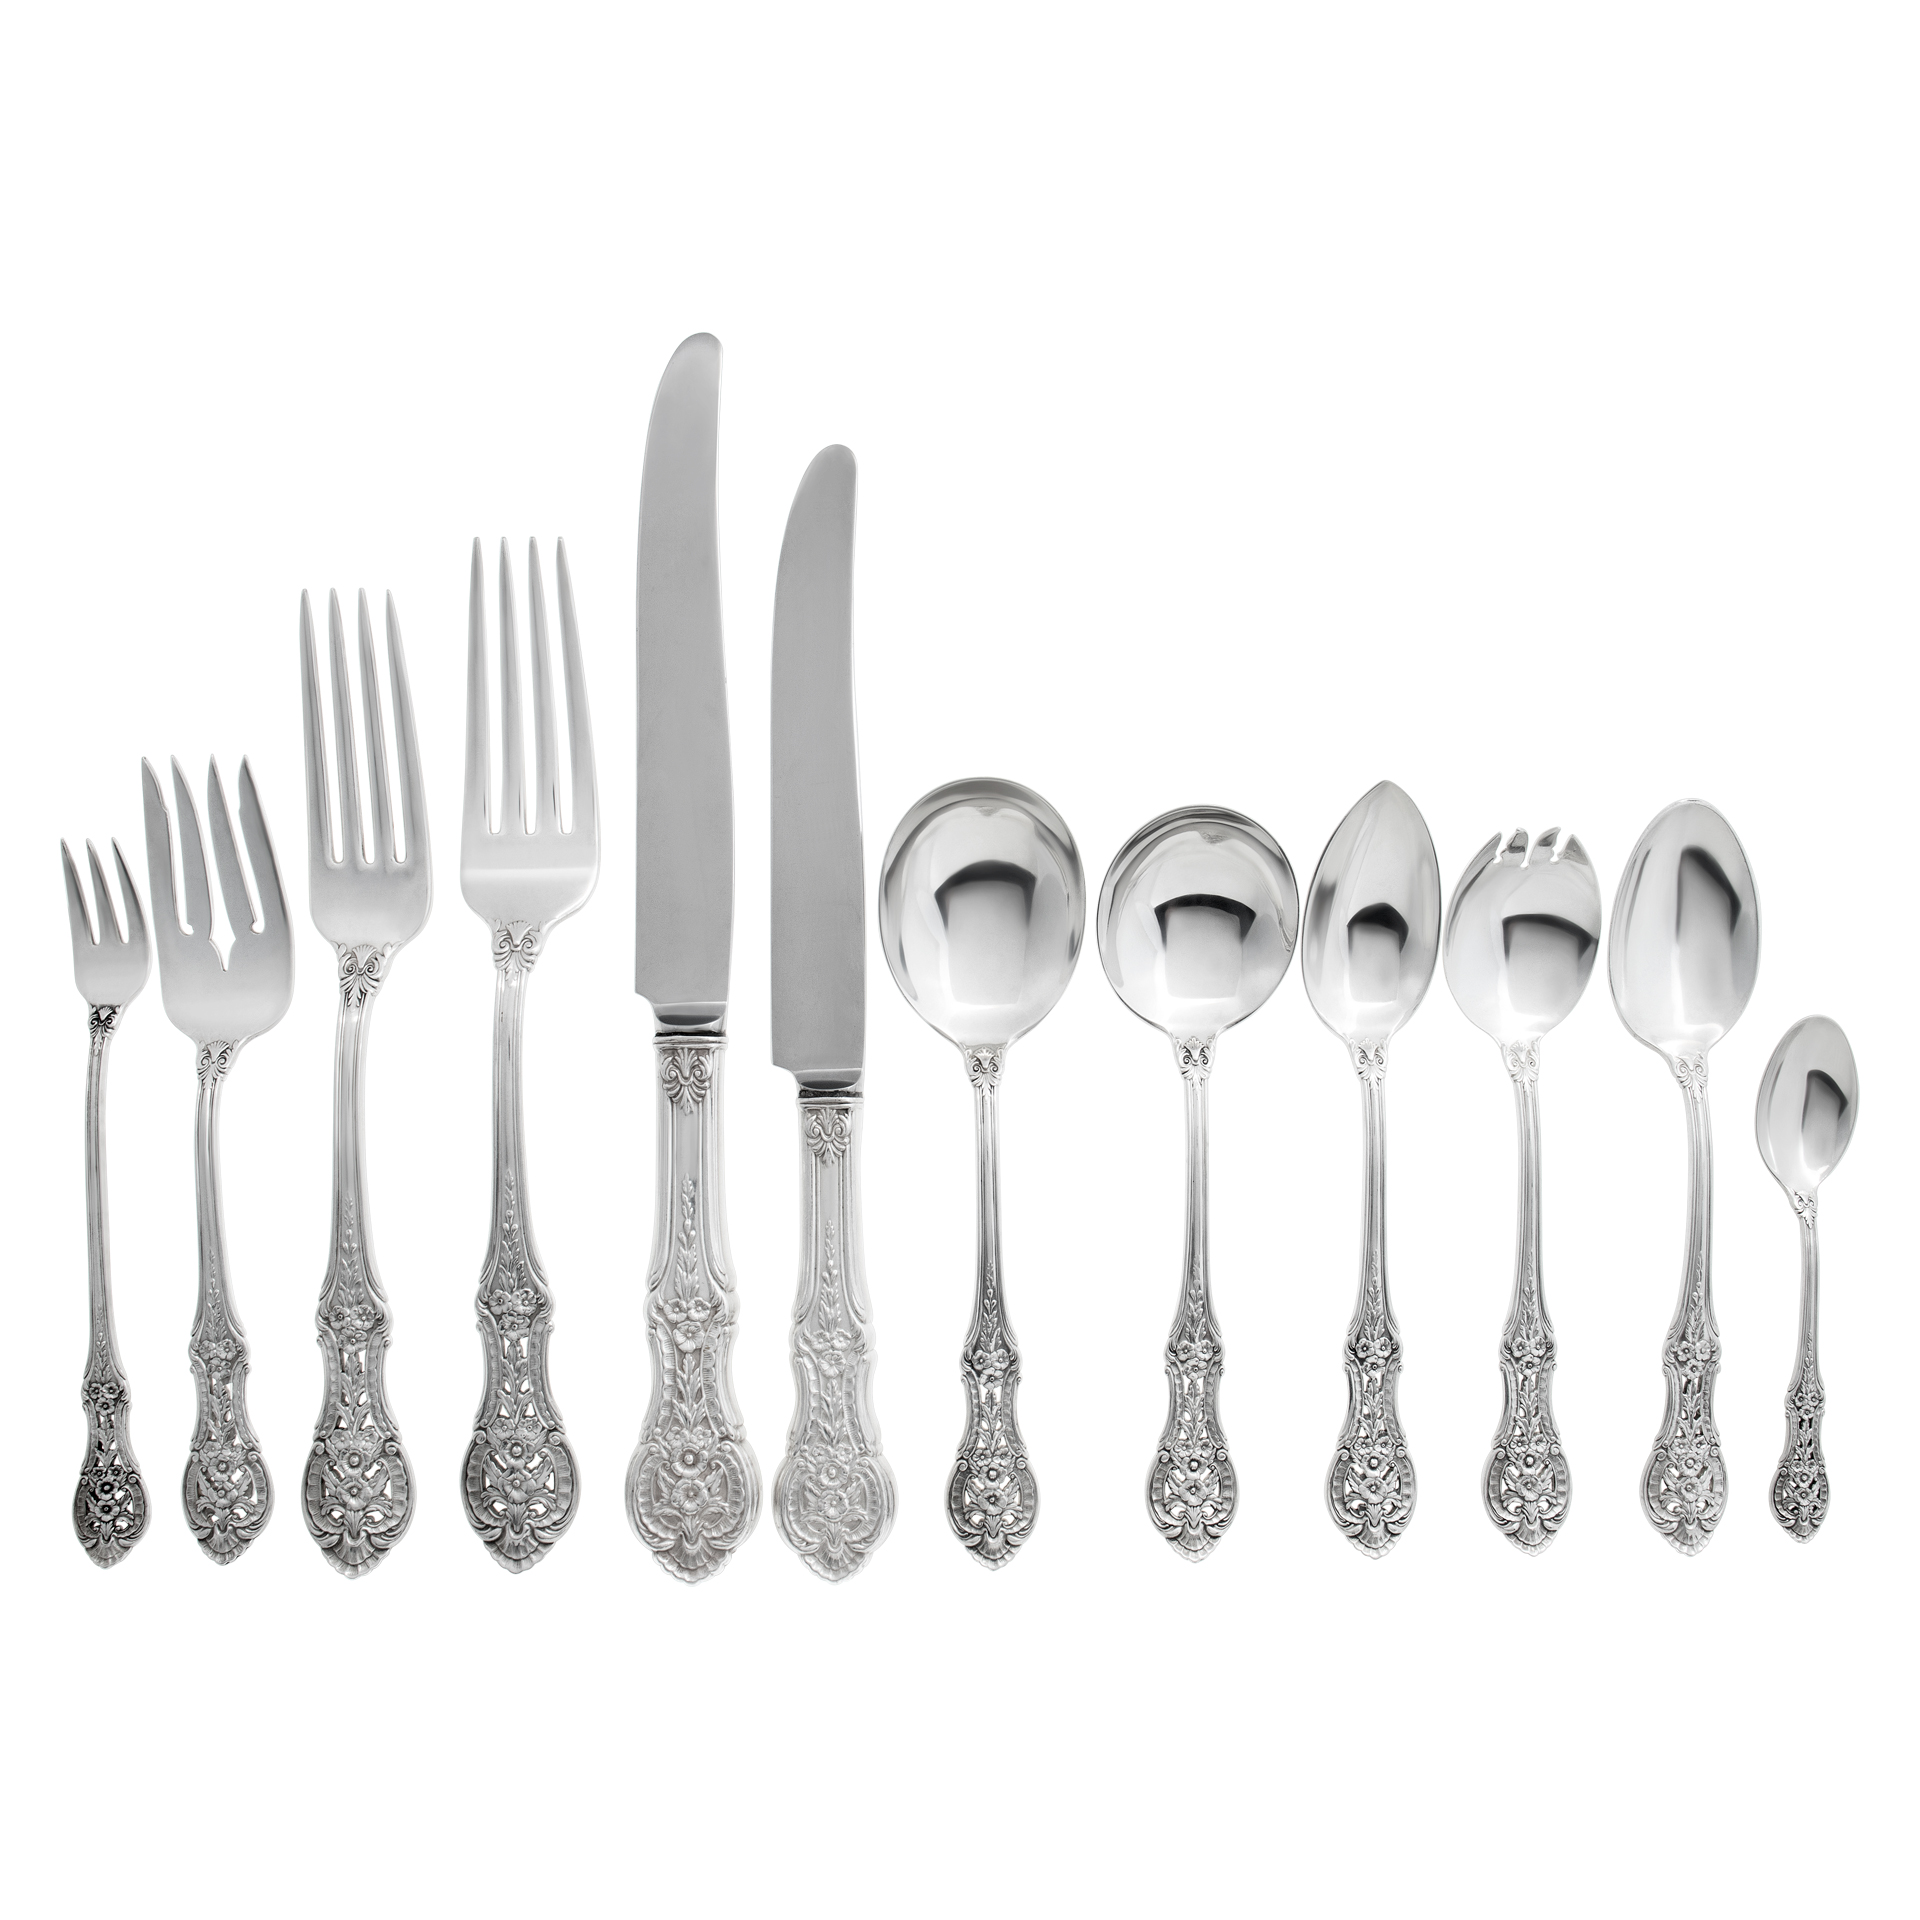 PRIMROSE, Sterling silver flatware set by International, patented in 1936. Lunch & dinner with 12 serving pieces. 165 total pieces .approx. 175 troy ounces of .925 sterling silver.